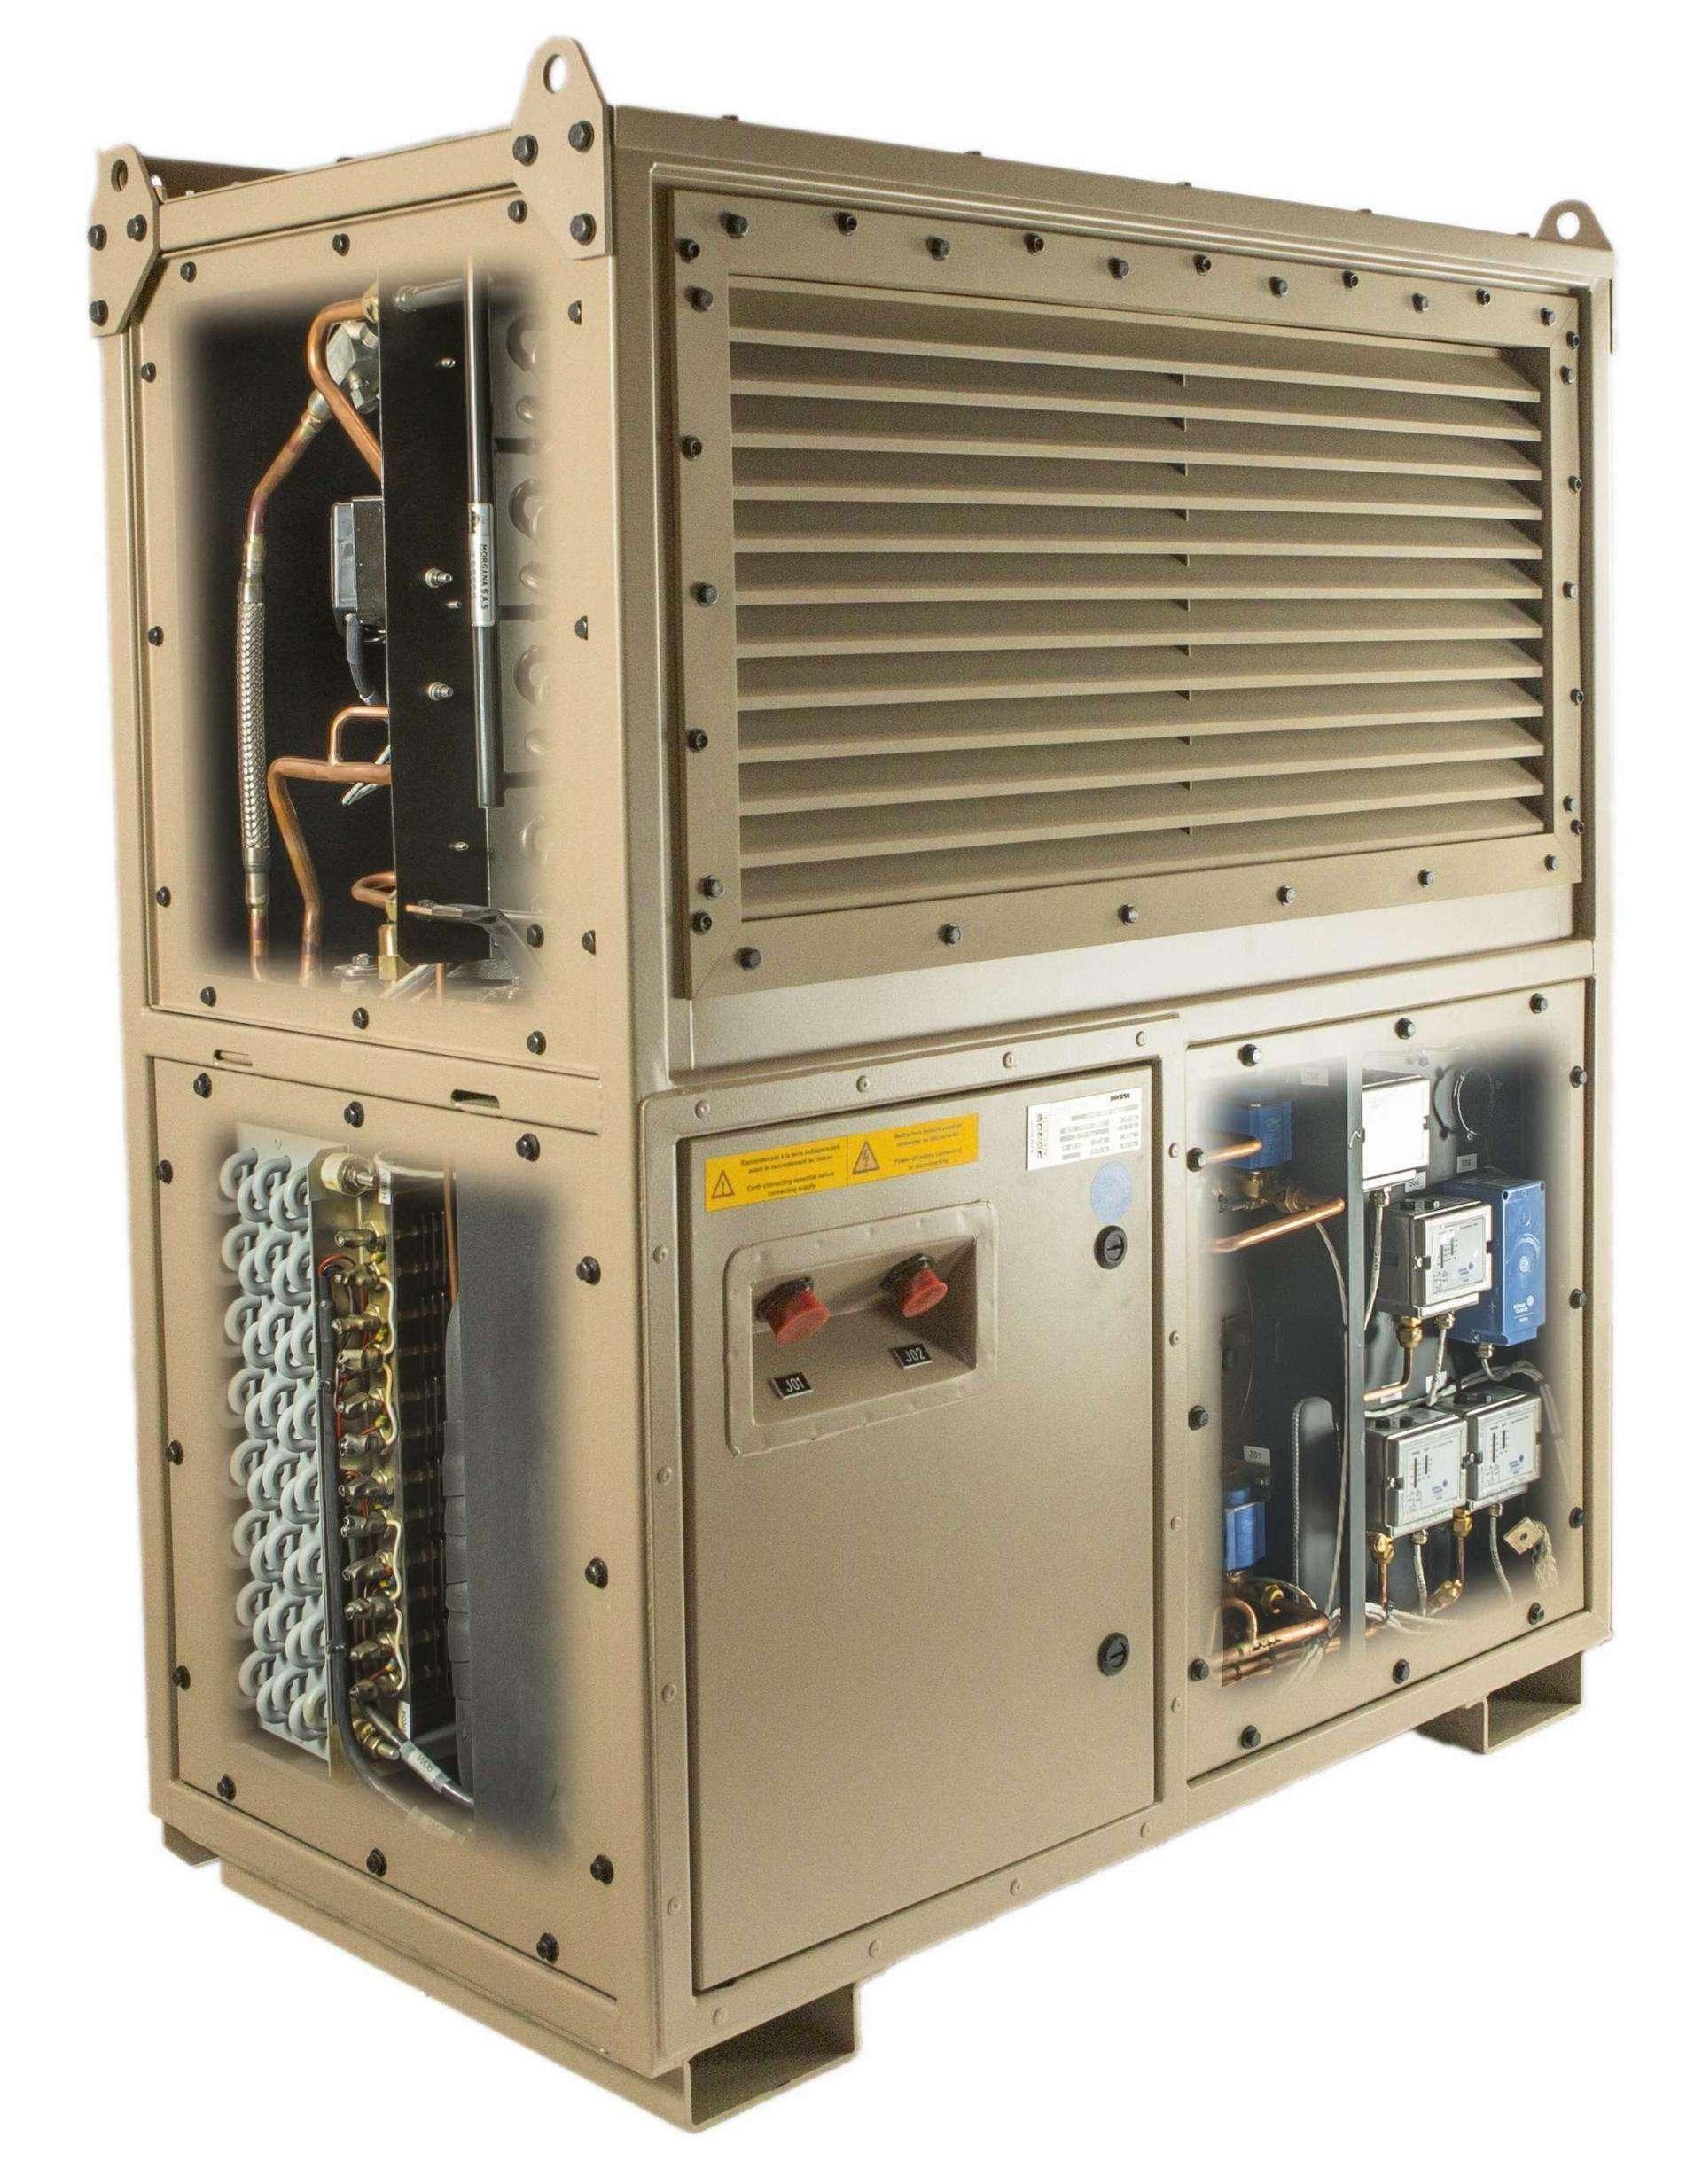 Military air conditioning system